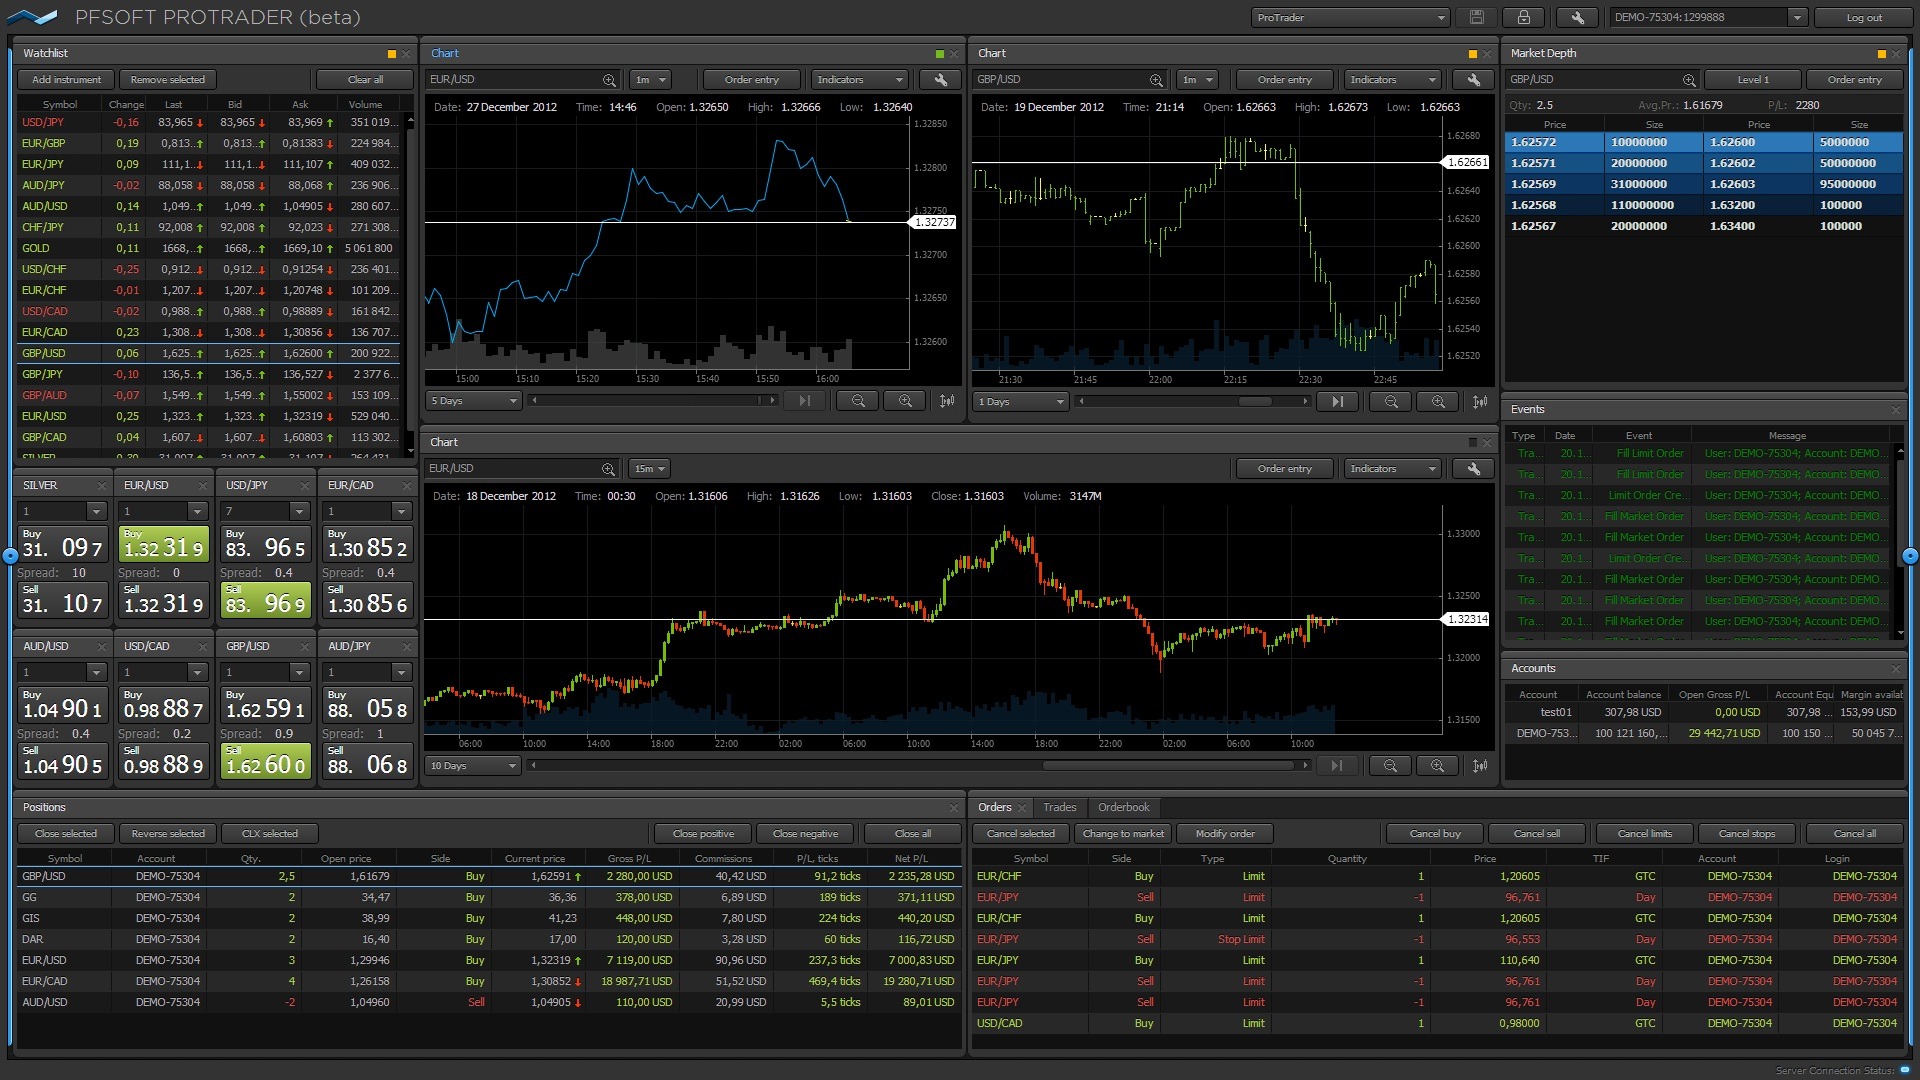 Protrader Web - More Options for the PFSOFT Software